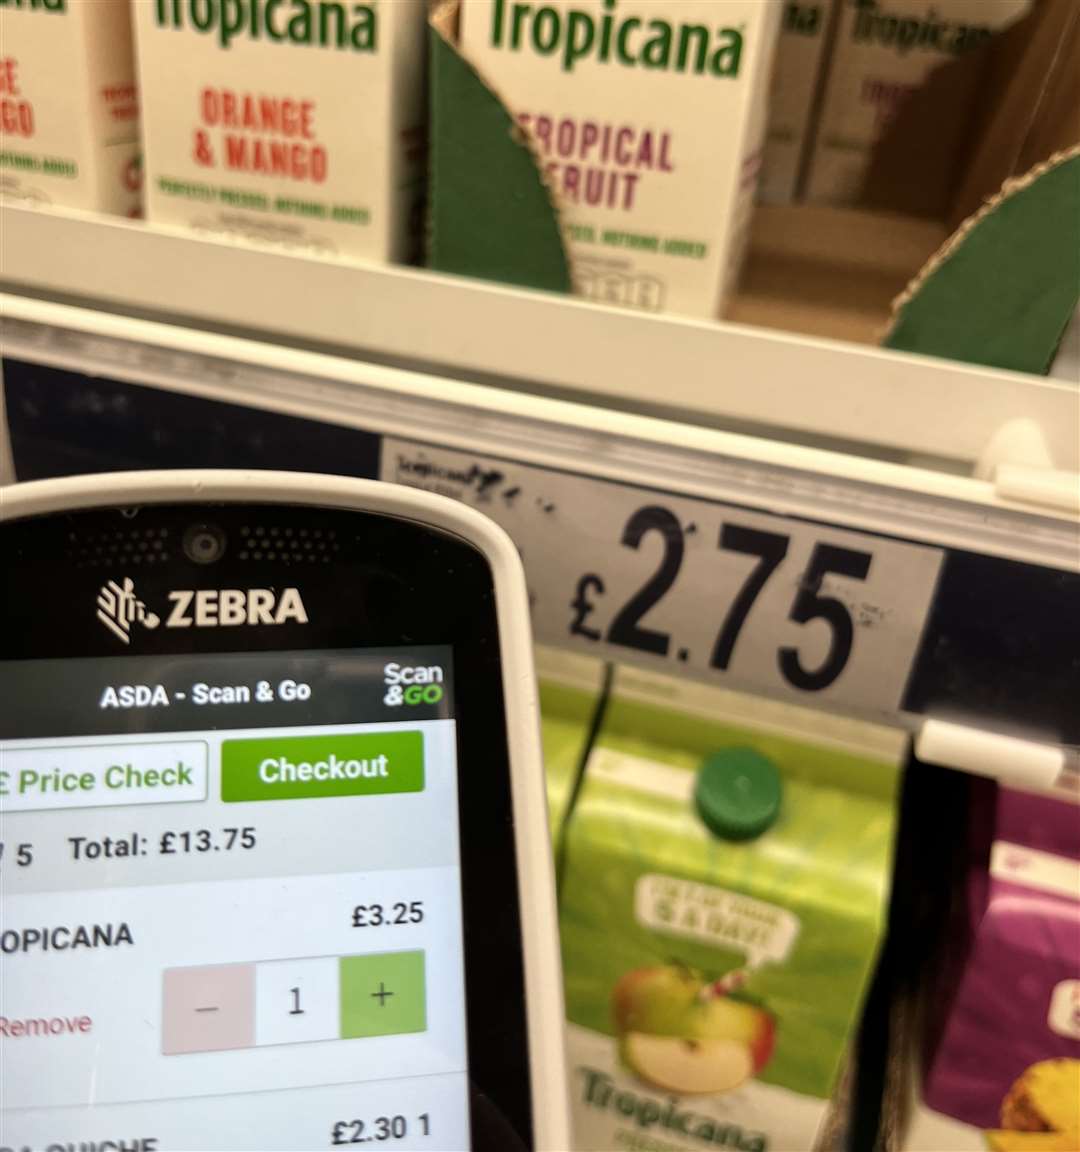 Our reporter scanned 10 items in Strood Asda, with a Tropicana drink the only discrepancy